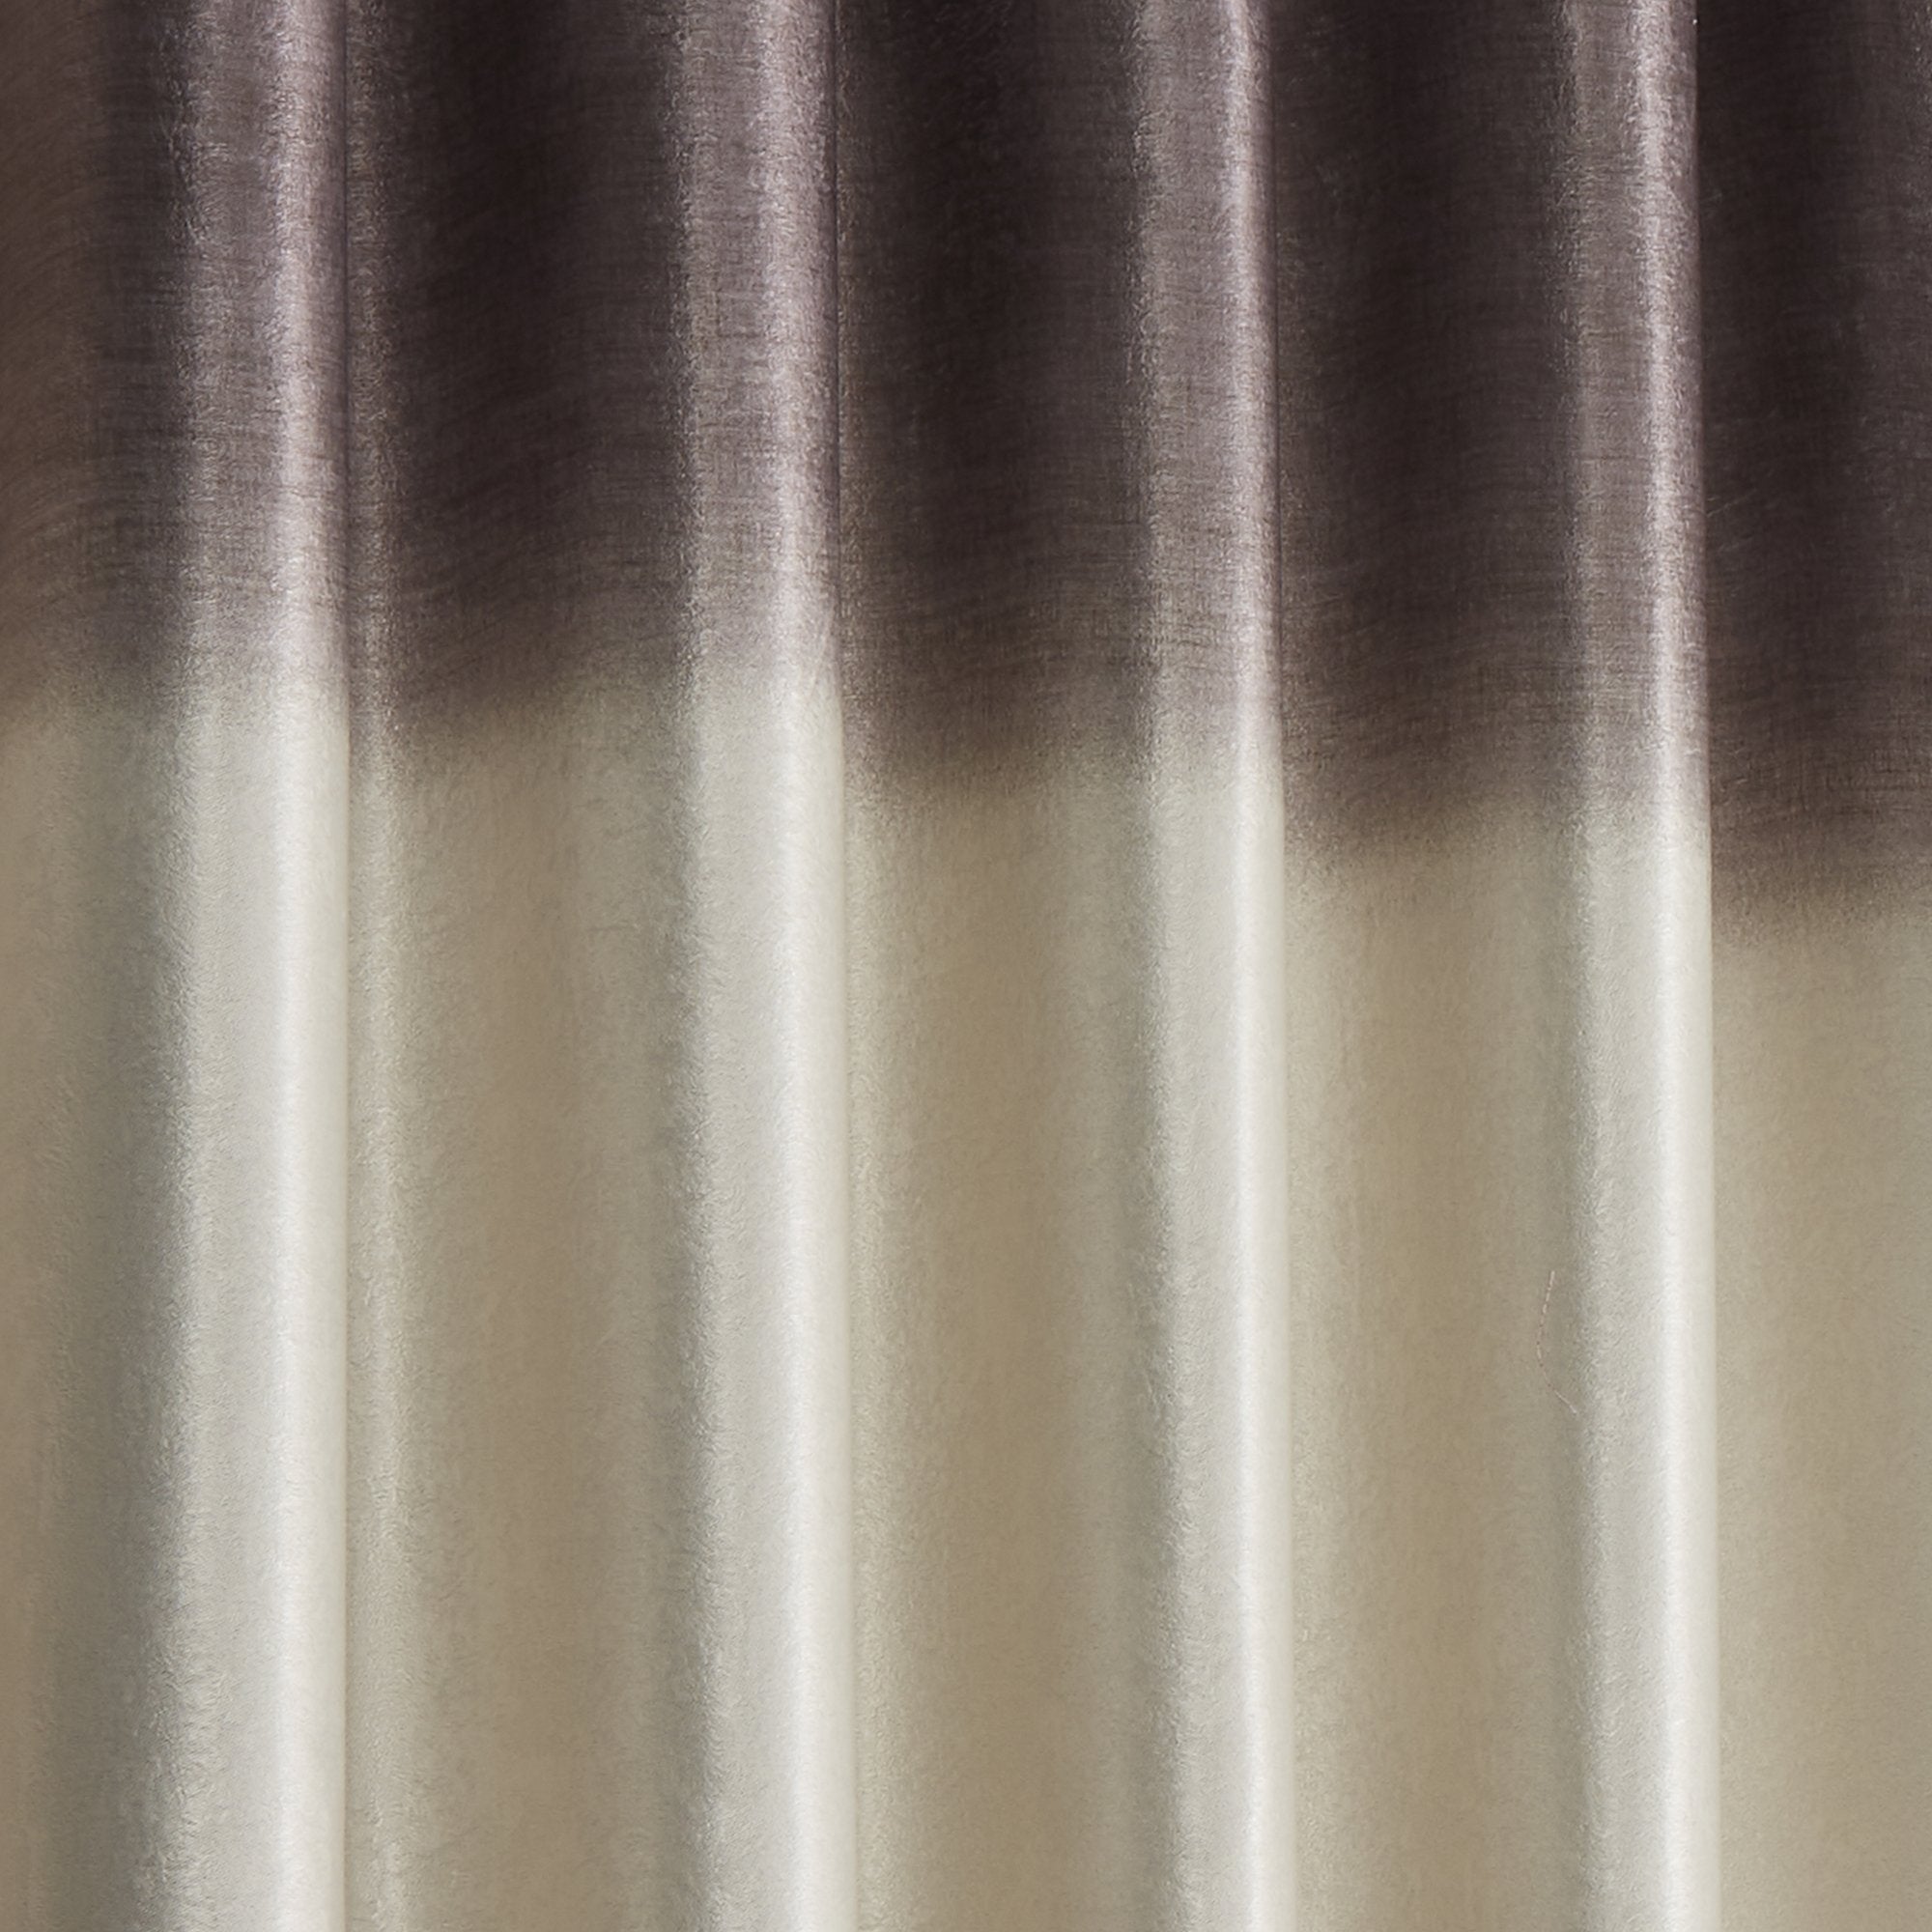 Pair of Eyelet Curtains Ombre Strata by Fusion in Chocolate